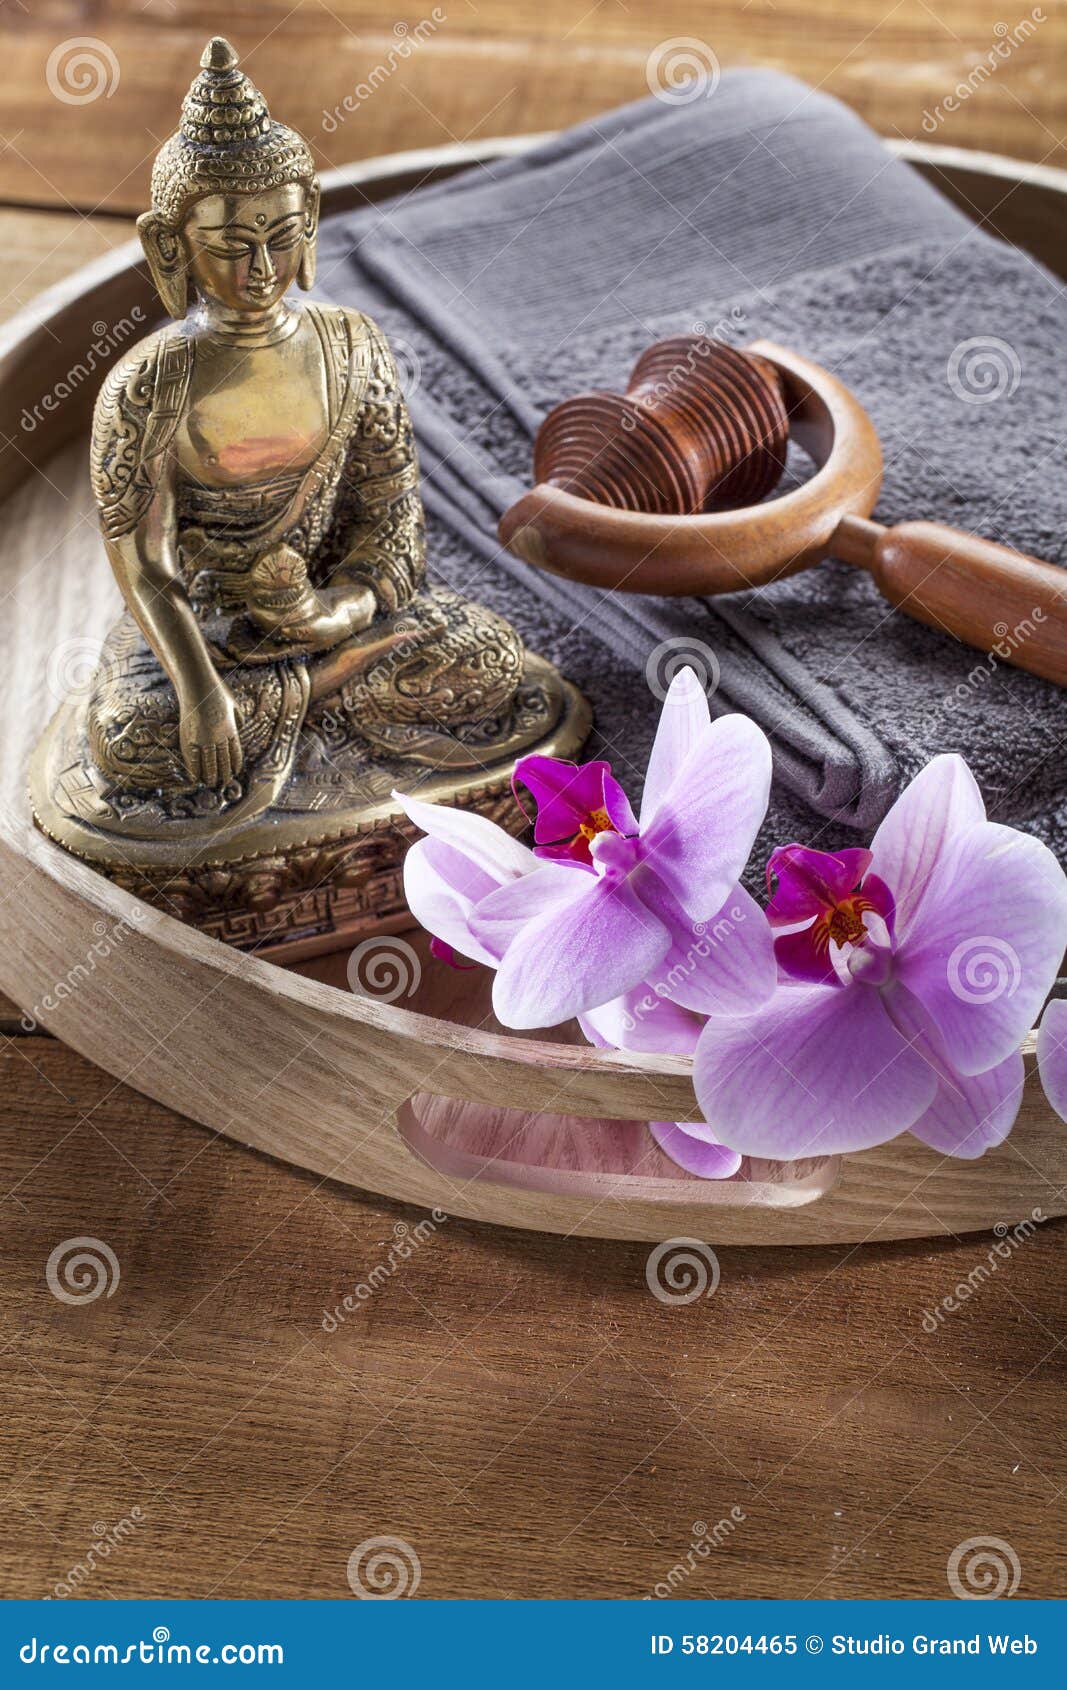 wooden tray with buddha and orchid flowers for spirituality and massage